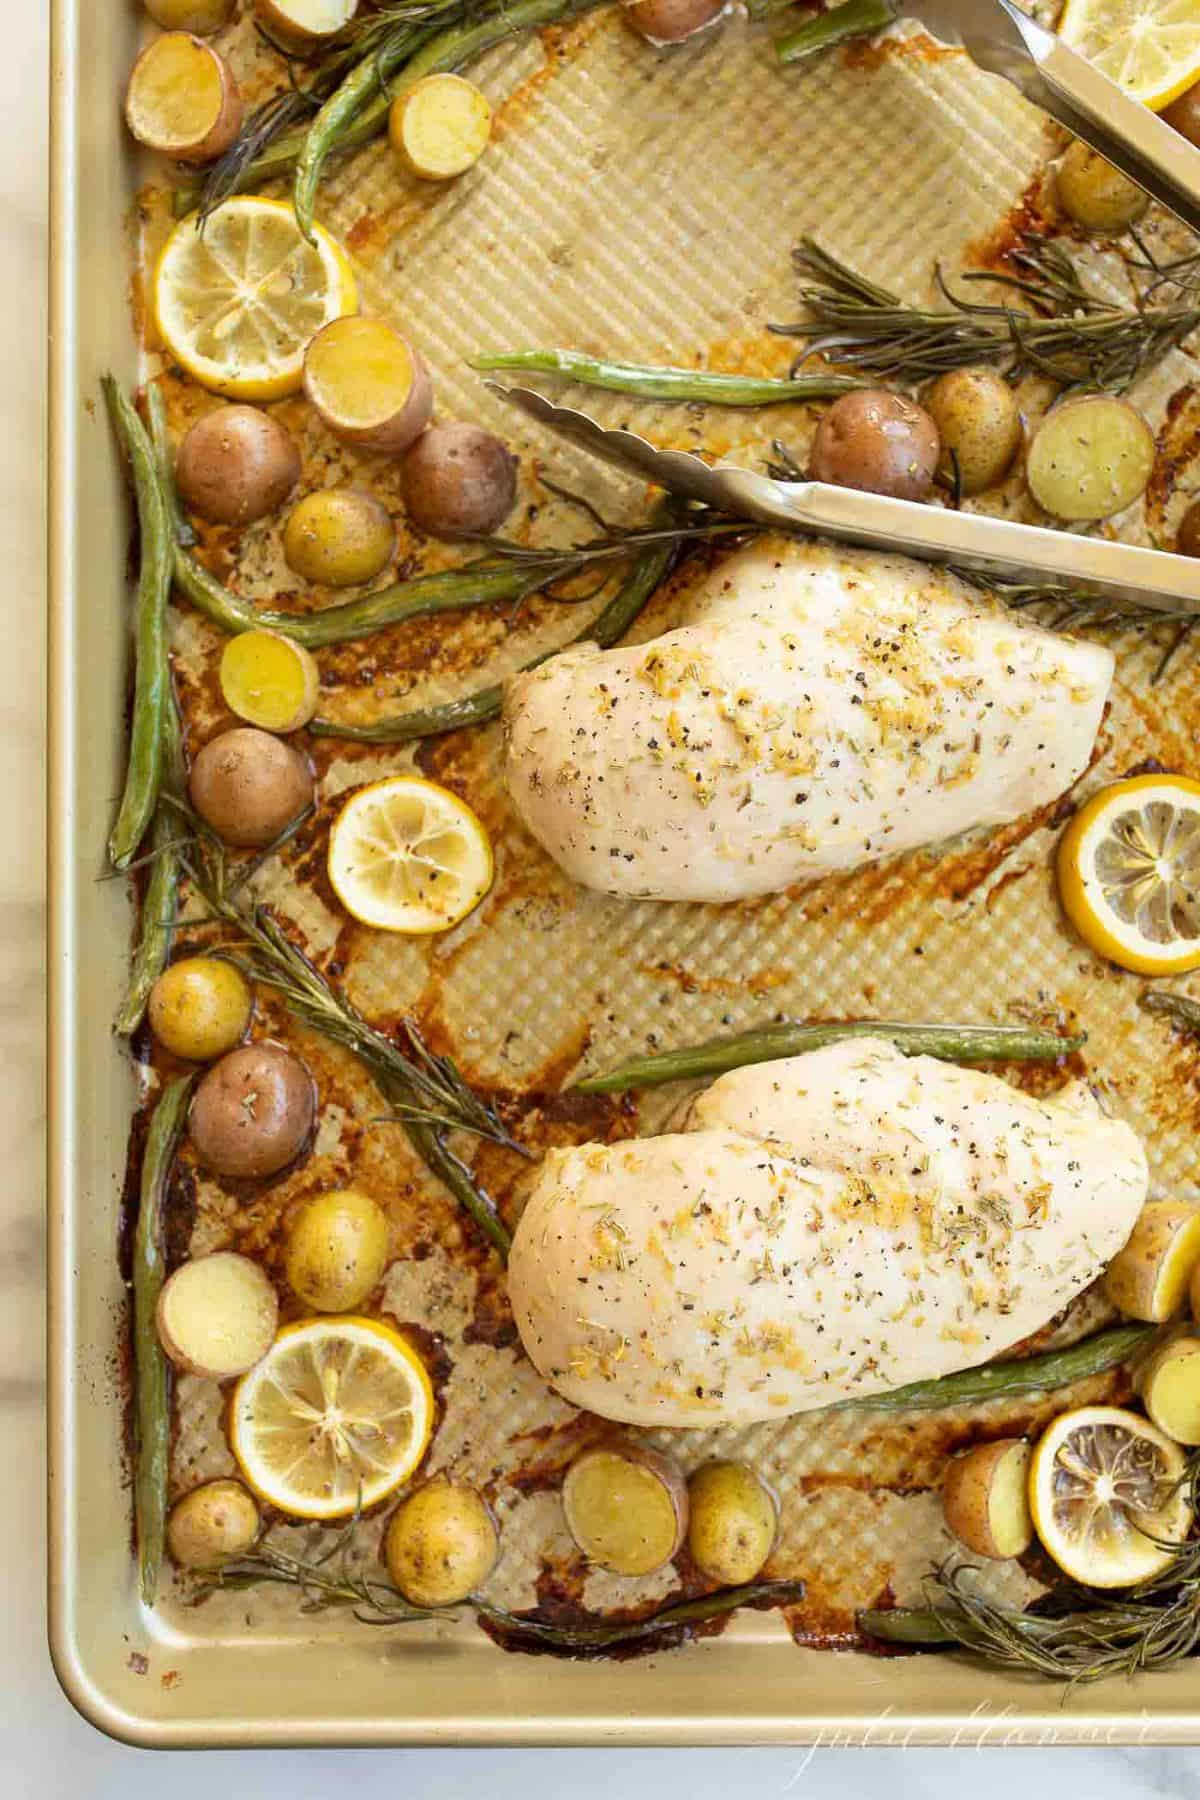 Gold sheetpan filled with baked chicken and veggies such as green beans, baby potatoes and lemon slices. #bakedchickenandveggies #rosemarychicken 